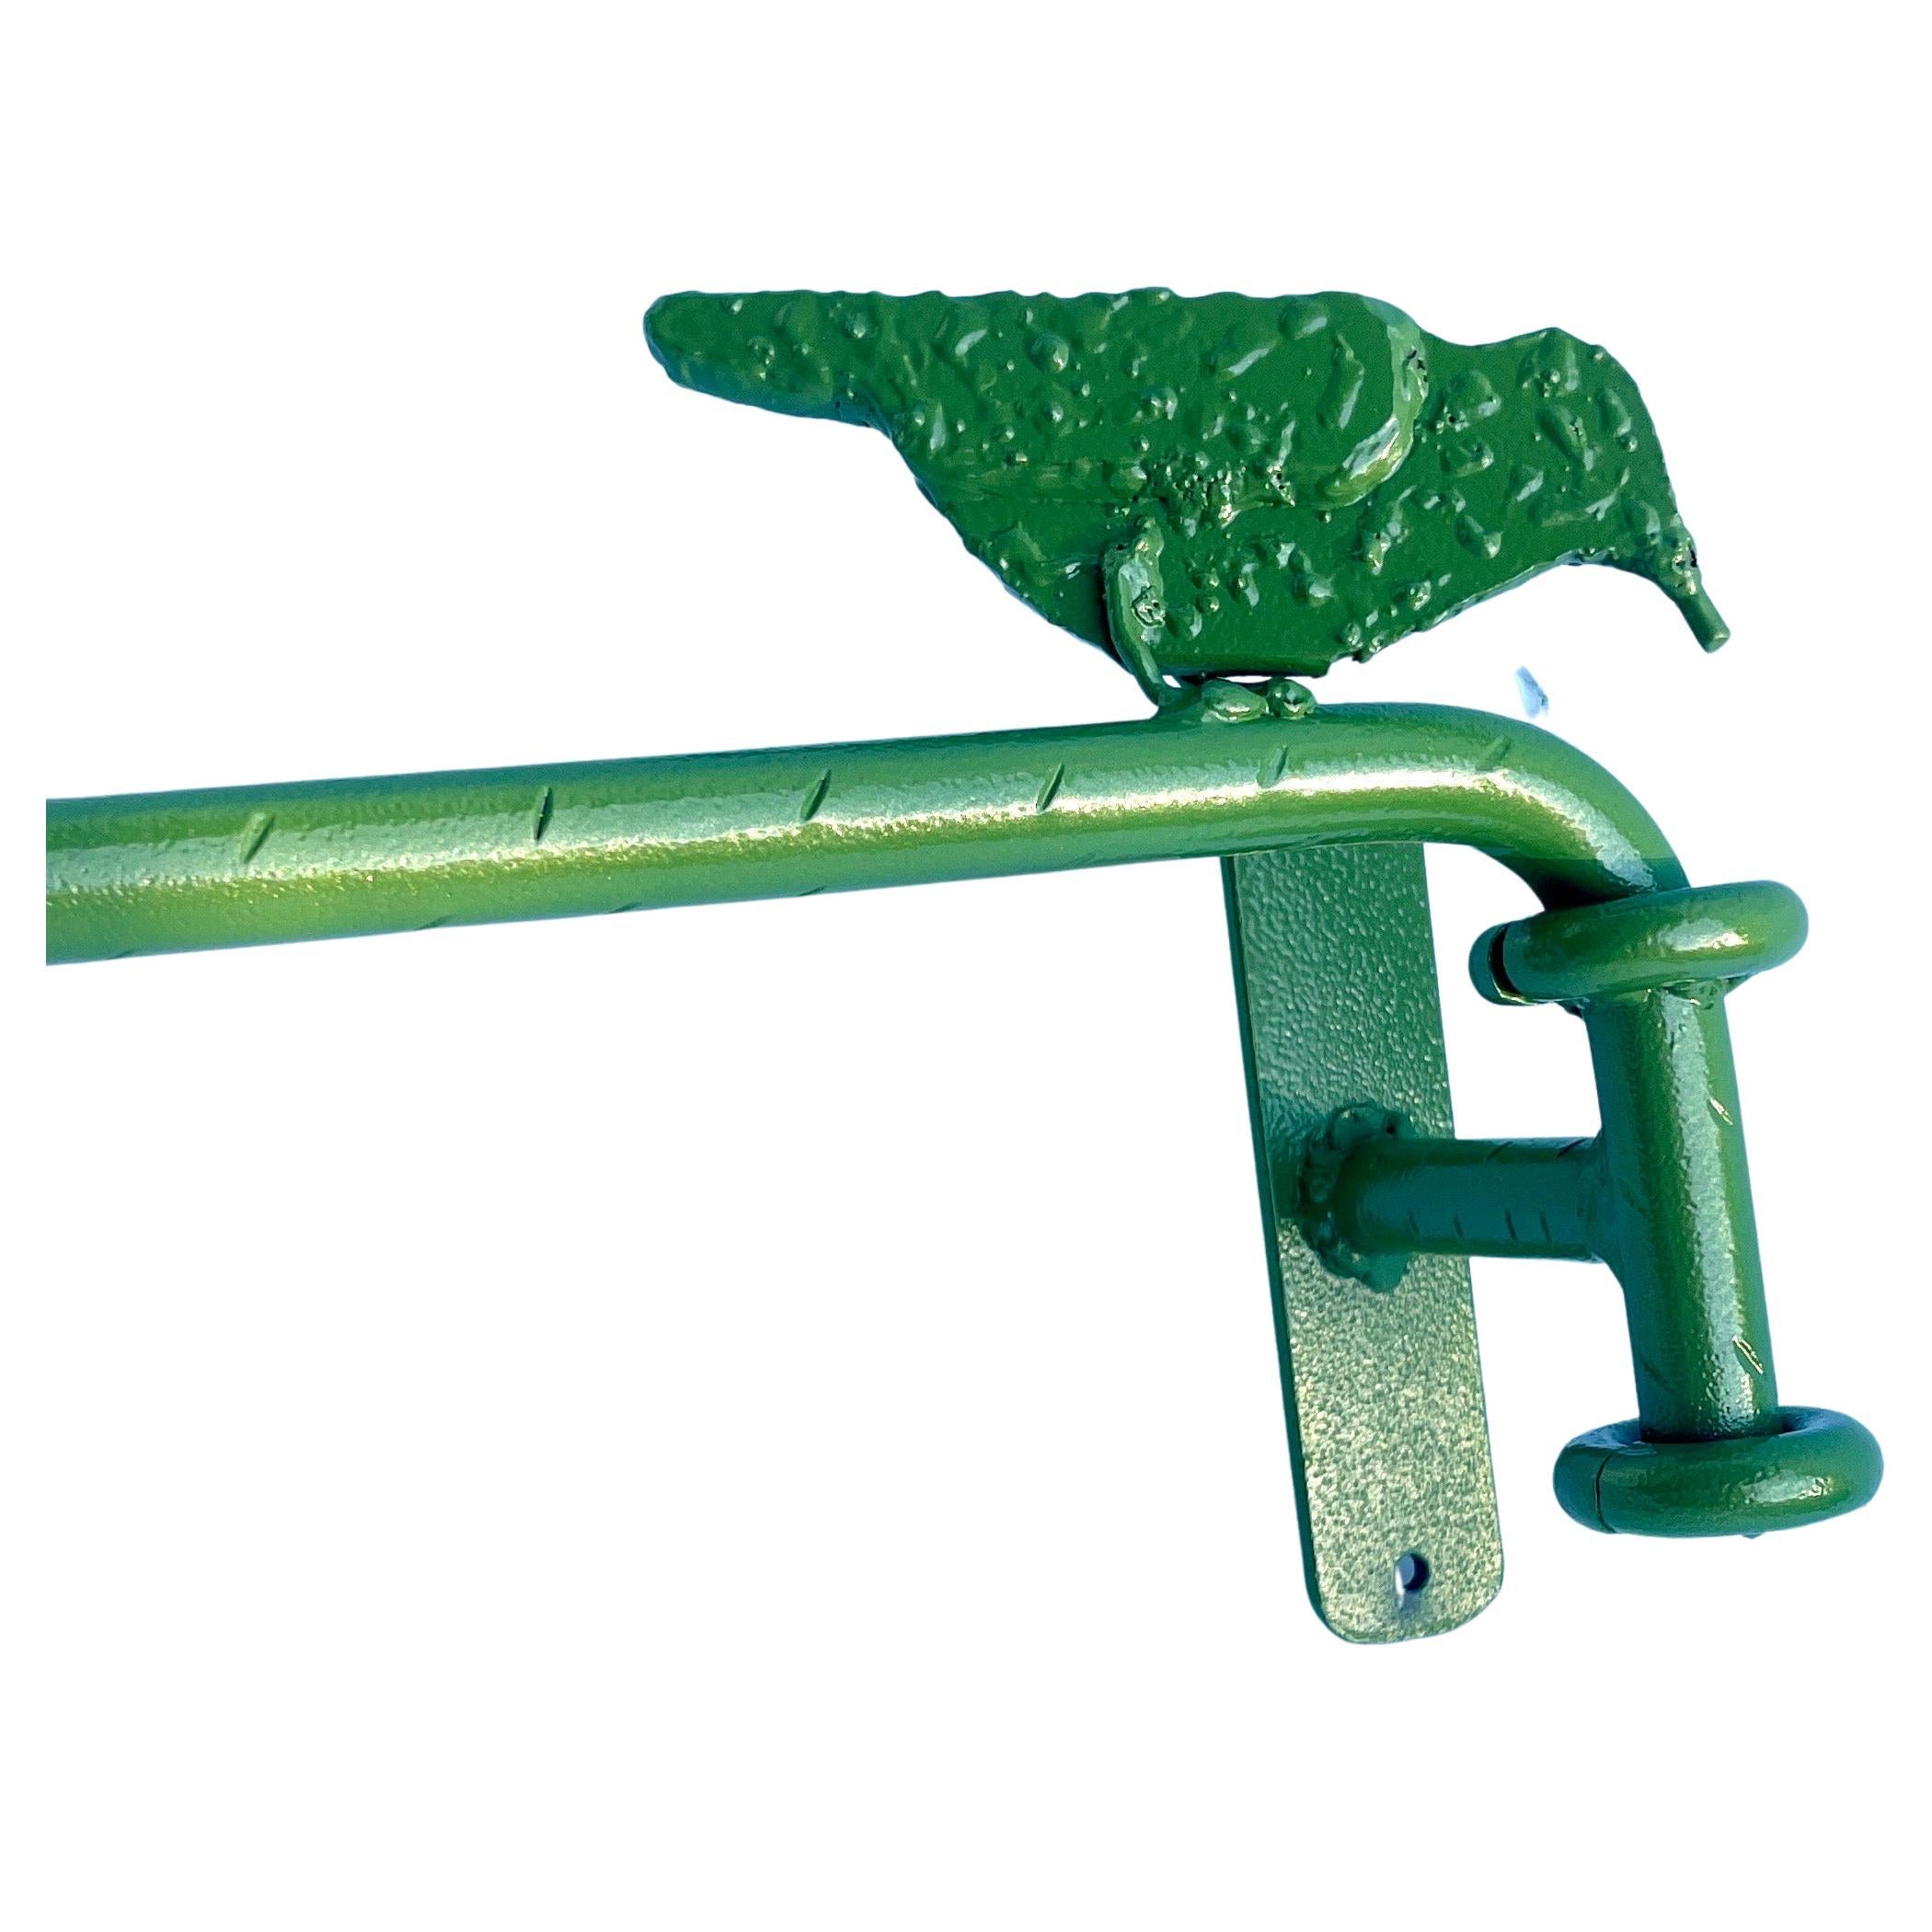 American Hand-Crafted Iron Wall Bar Rod With Birds, Green Powder-Coated For Sale